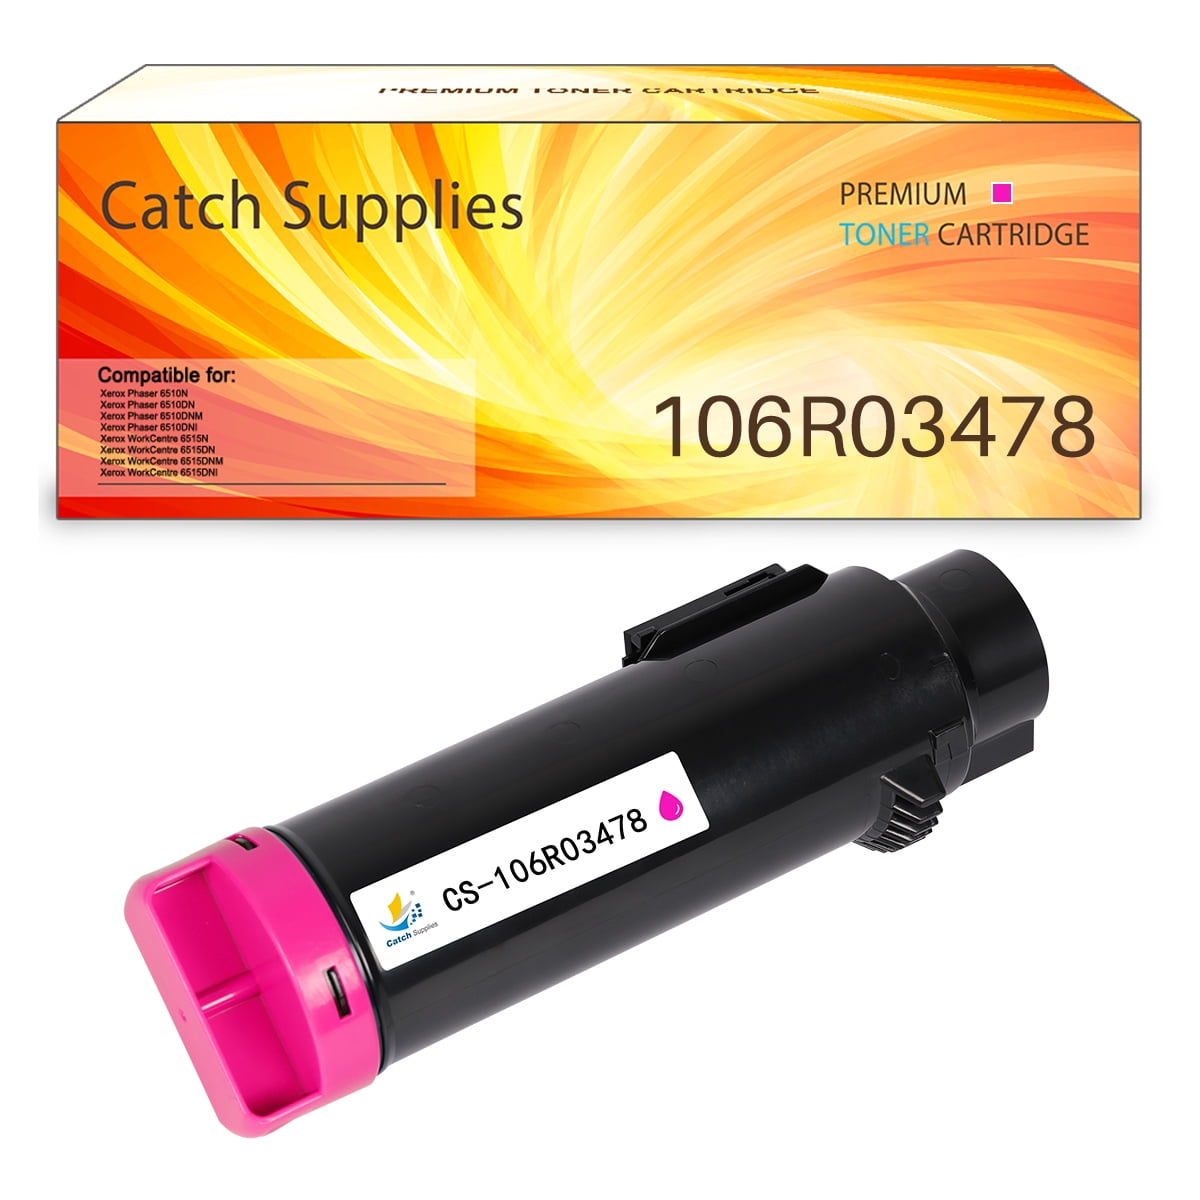 Catch Supplies Compatible Toner Replacement for Xerox Phaser 6510 6510/dni 6510/dn 6510/n Workcentre 6515 6515/dni 6515/dn 6515/n Printer High (1 Magenta) -